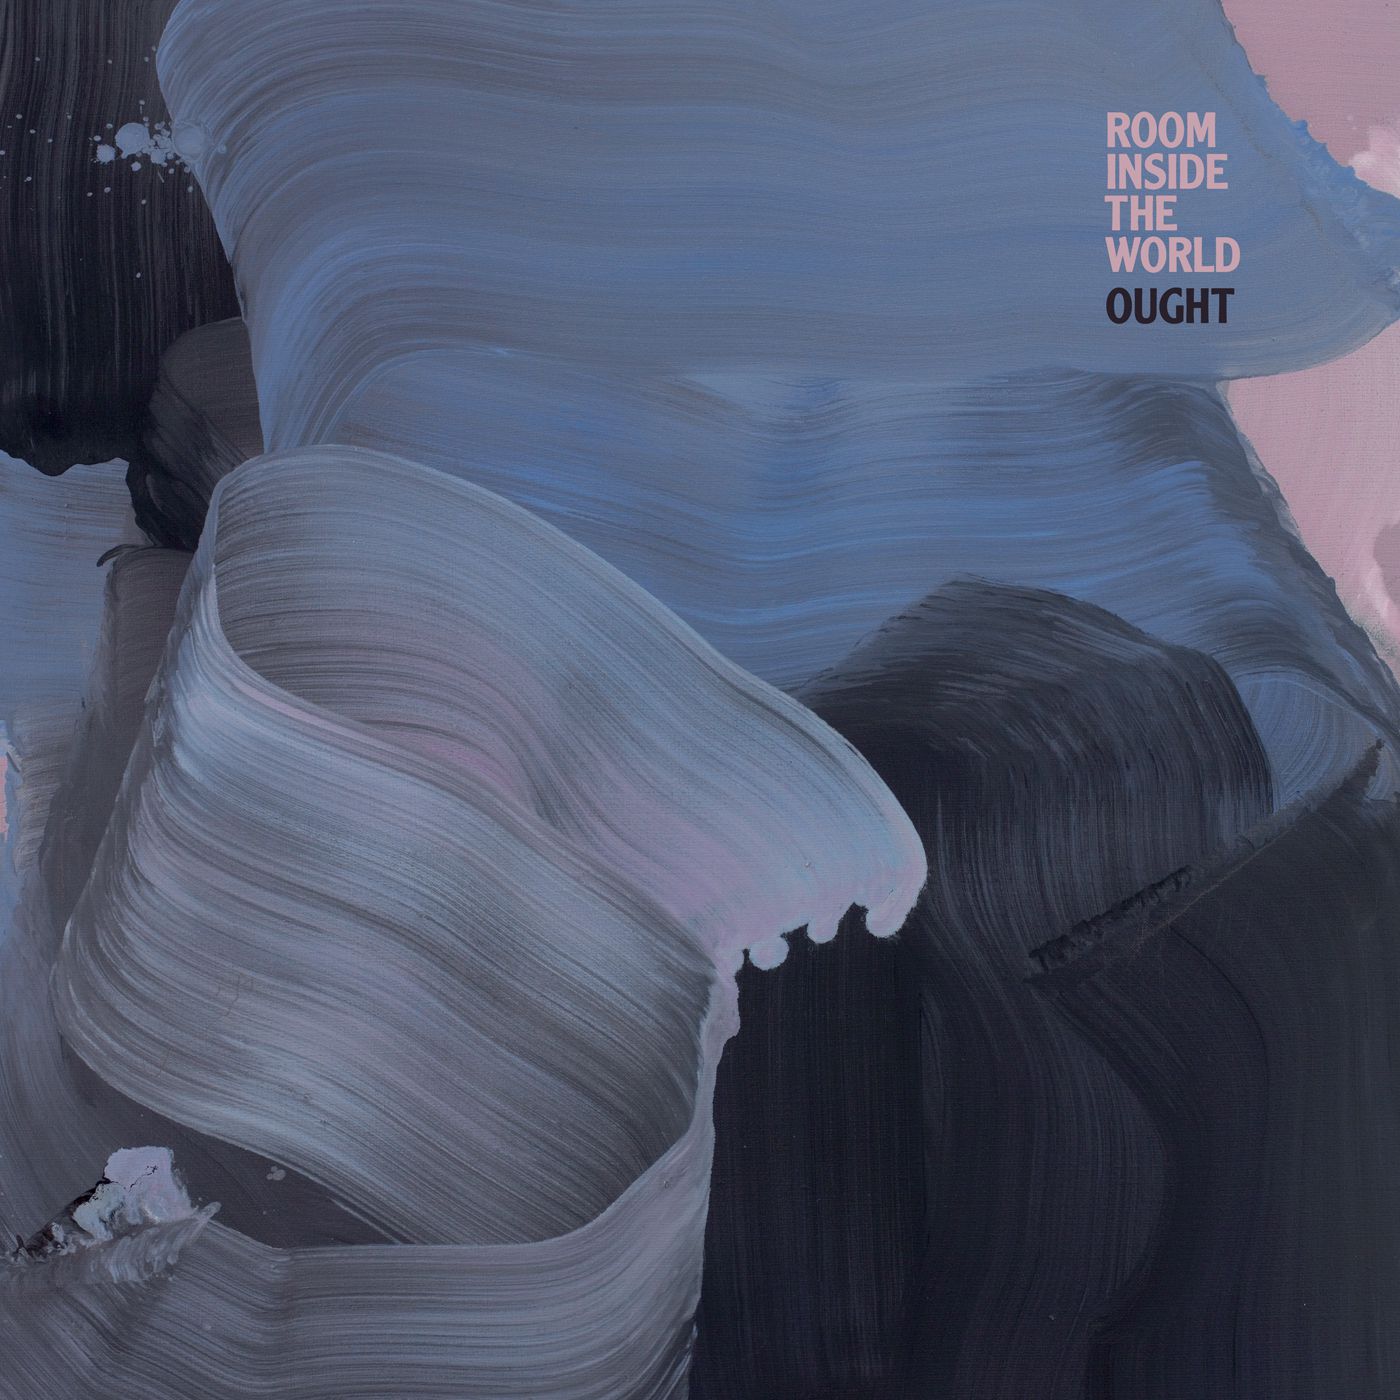 608 ought roominsidetheworld 1400 Ought announce new album, Room Inside the World, reveal These 3 Things video: Watch